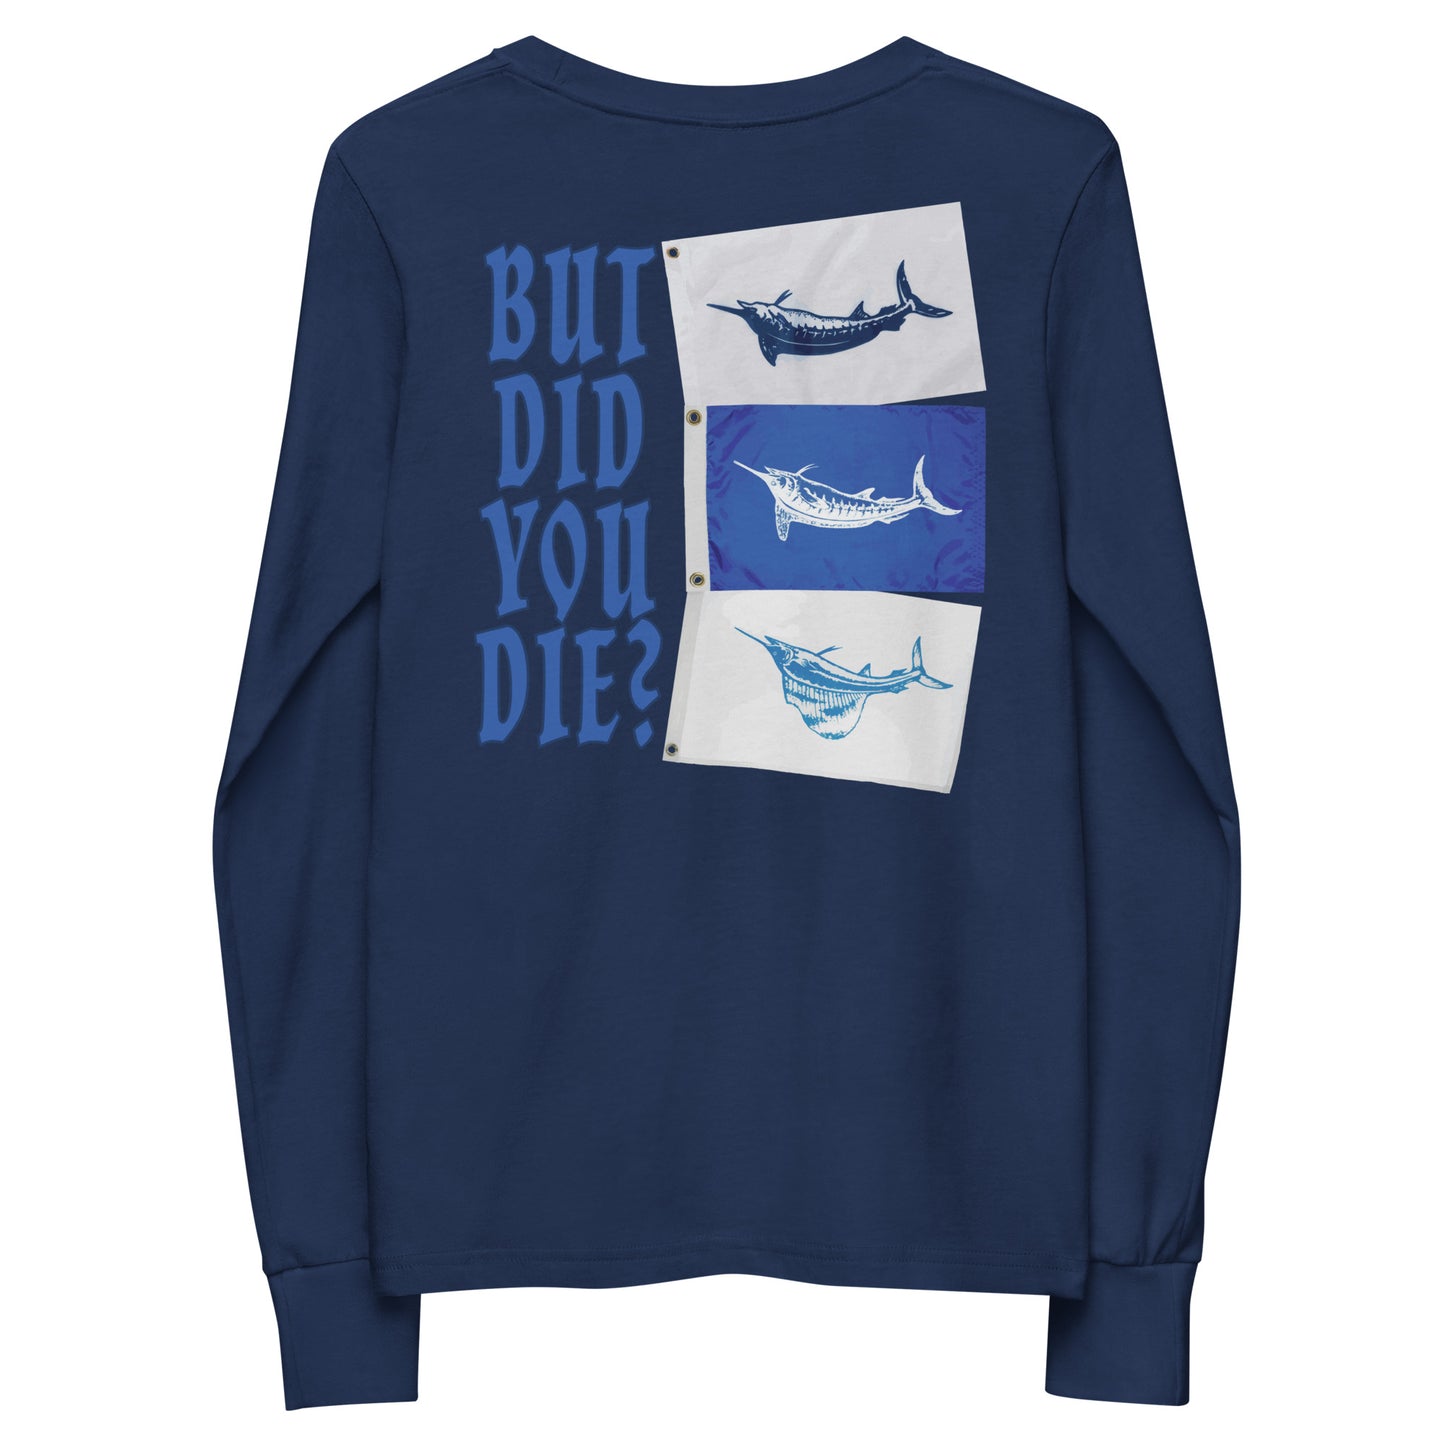 But Did You Die? Youth long sleeve tee